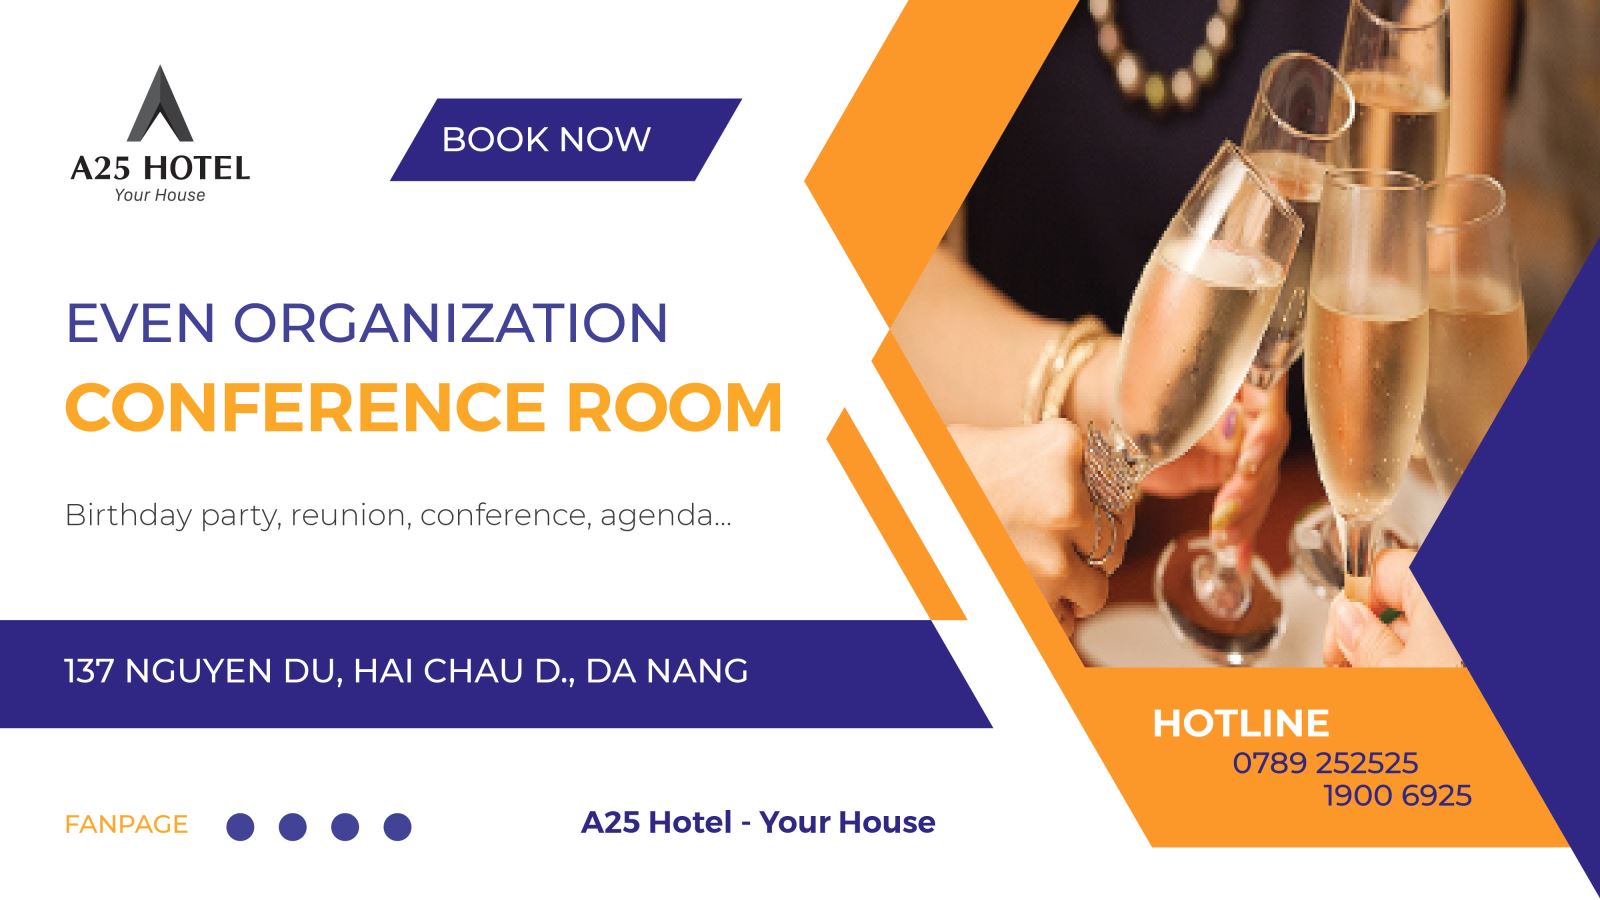 A25 HOTEL DA NANG - EVENT AND CONFERENCE